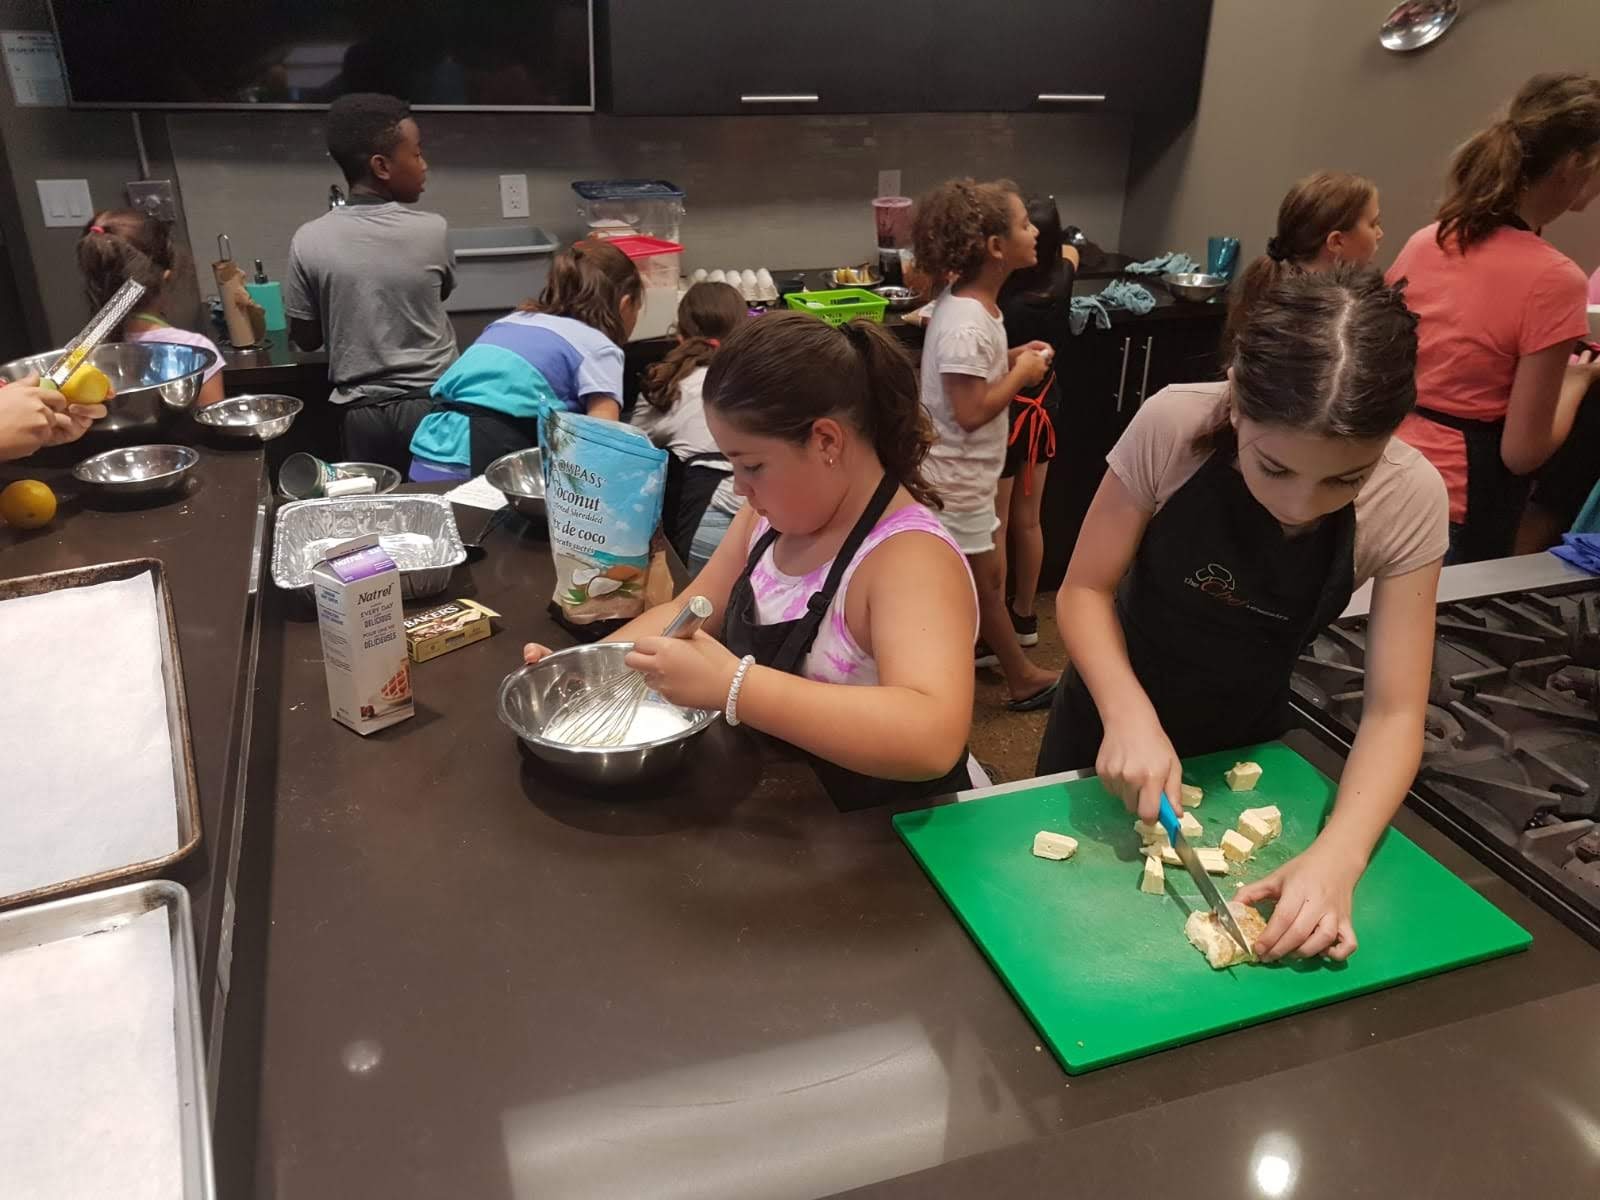 Midtown - Teen Cooking Classes - 8 week Fall Session - Tuesday September 13 – Tuesday November 15 2022